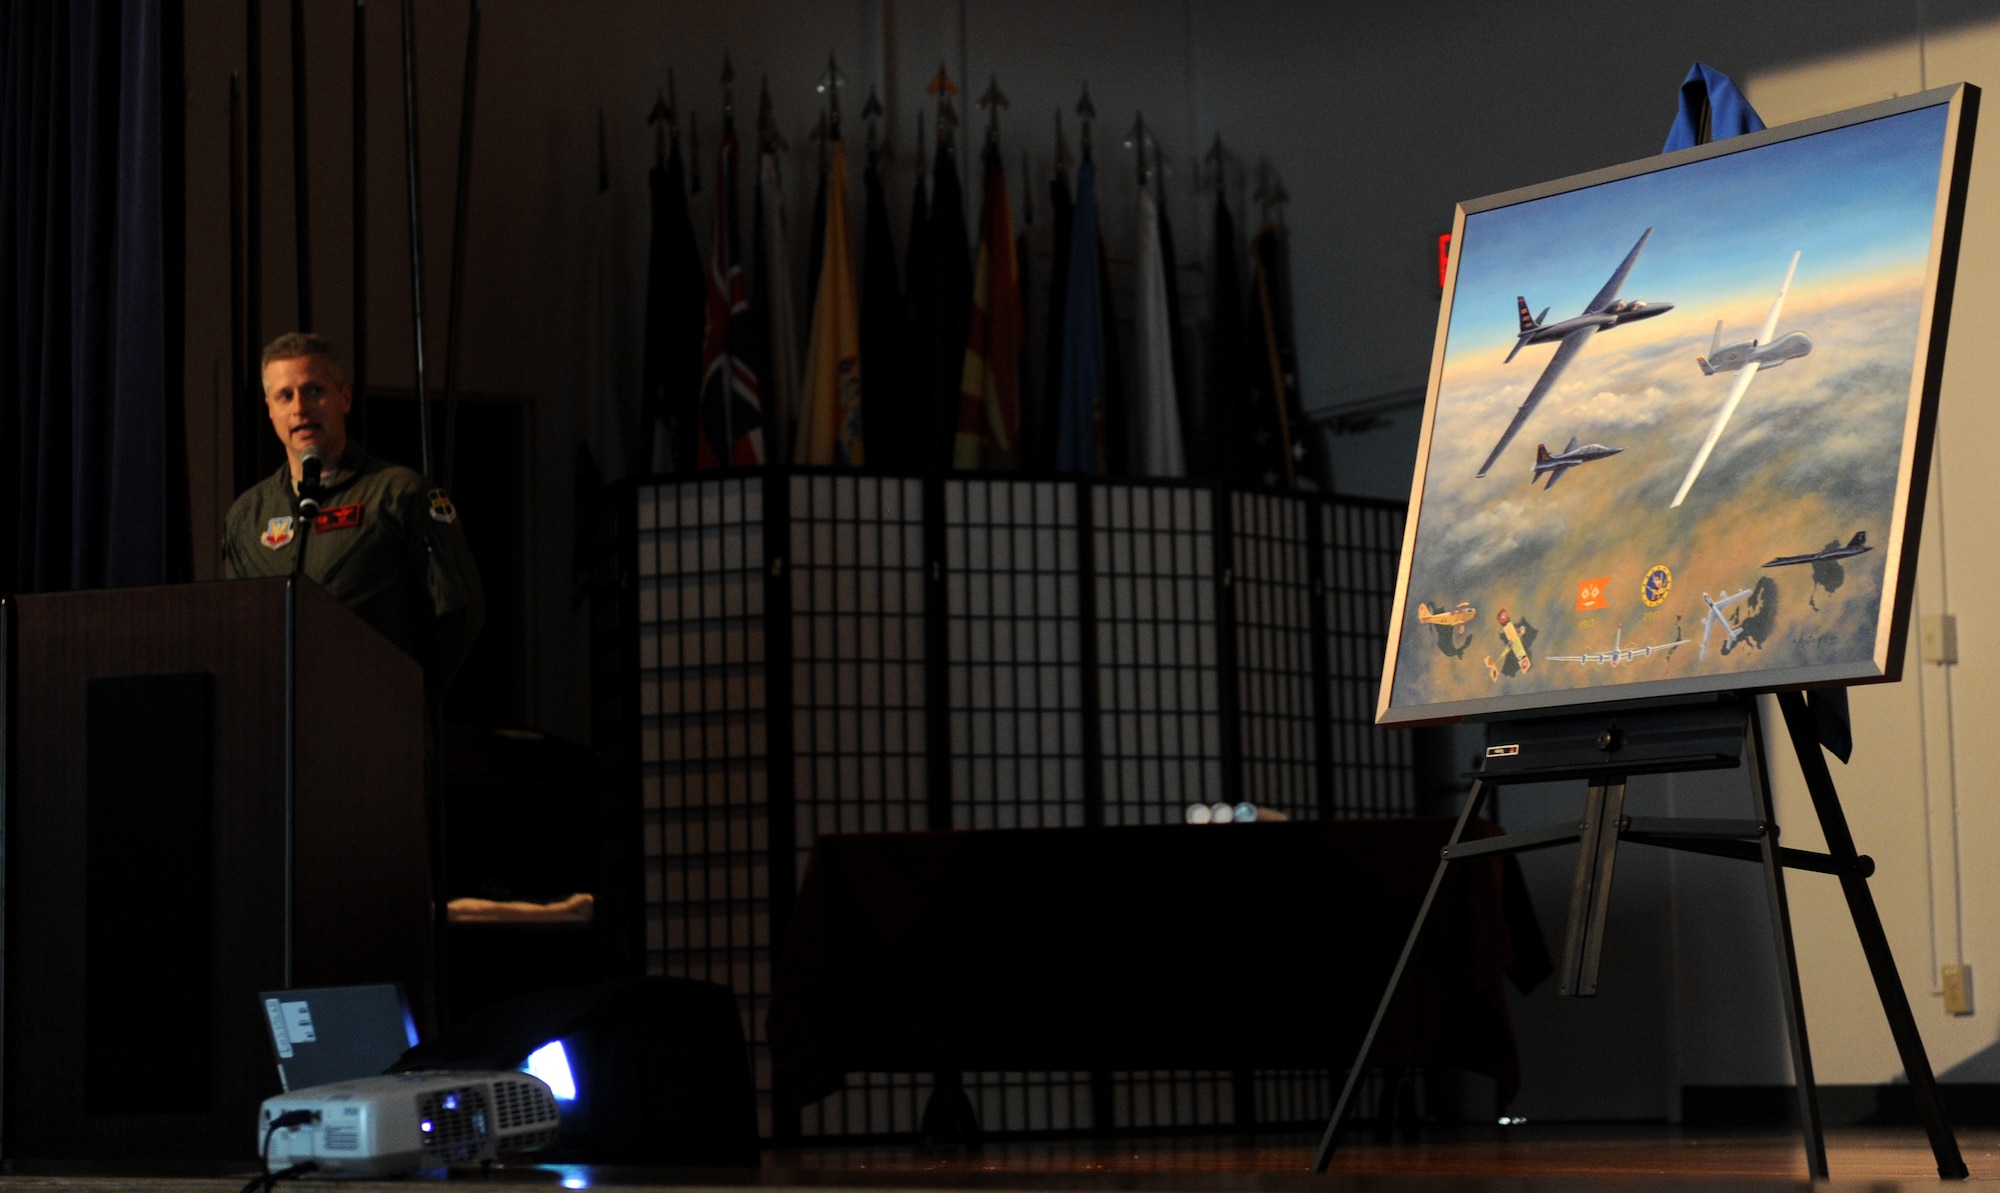 Lt. Col. Stephen Rodriguez, 1st Reconnaissance Squadron commander, talks about the commemorative painting of the 1st RS centennialat Beale Air Force Base, Calif., March 7, 2013. The art was painted by Kristin Hill, an aviation artist and participant of the U.S. Air Force Art Program. (U.S. Air Force photo by Staff Sgt. Robert M. Trujillo/Released)